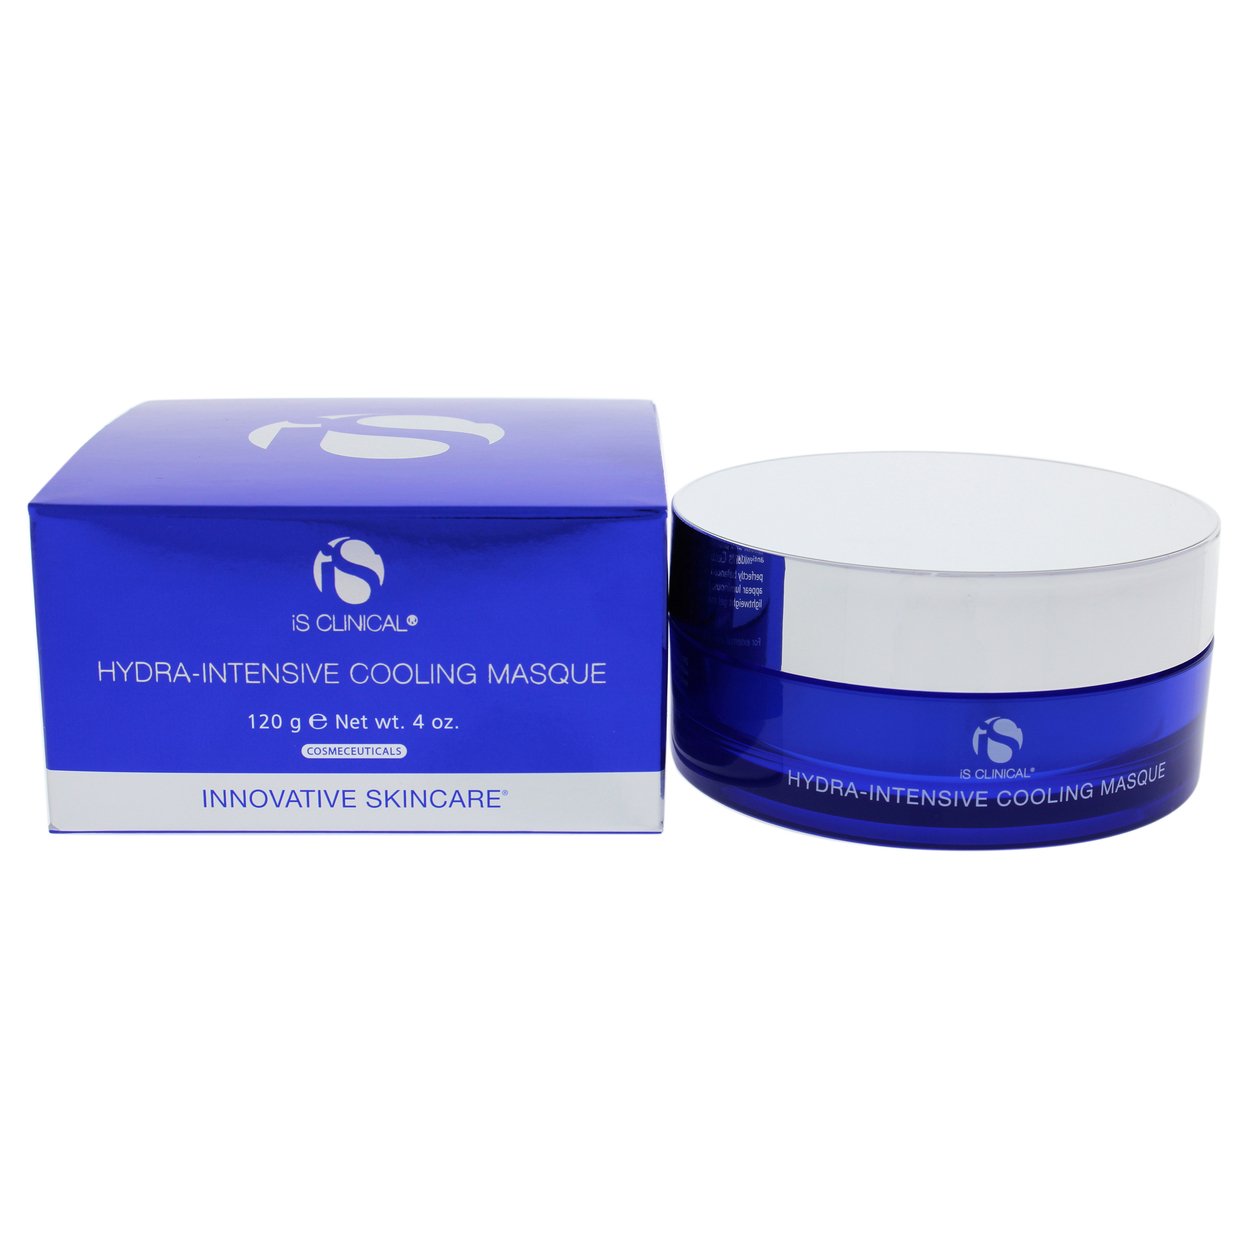 IS Clinical Unisex SKINCARE Hydra-Intensive Cooling Masque 4 Oz